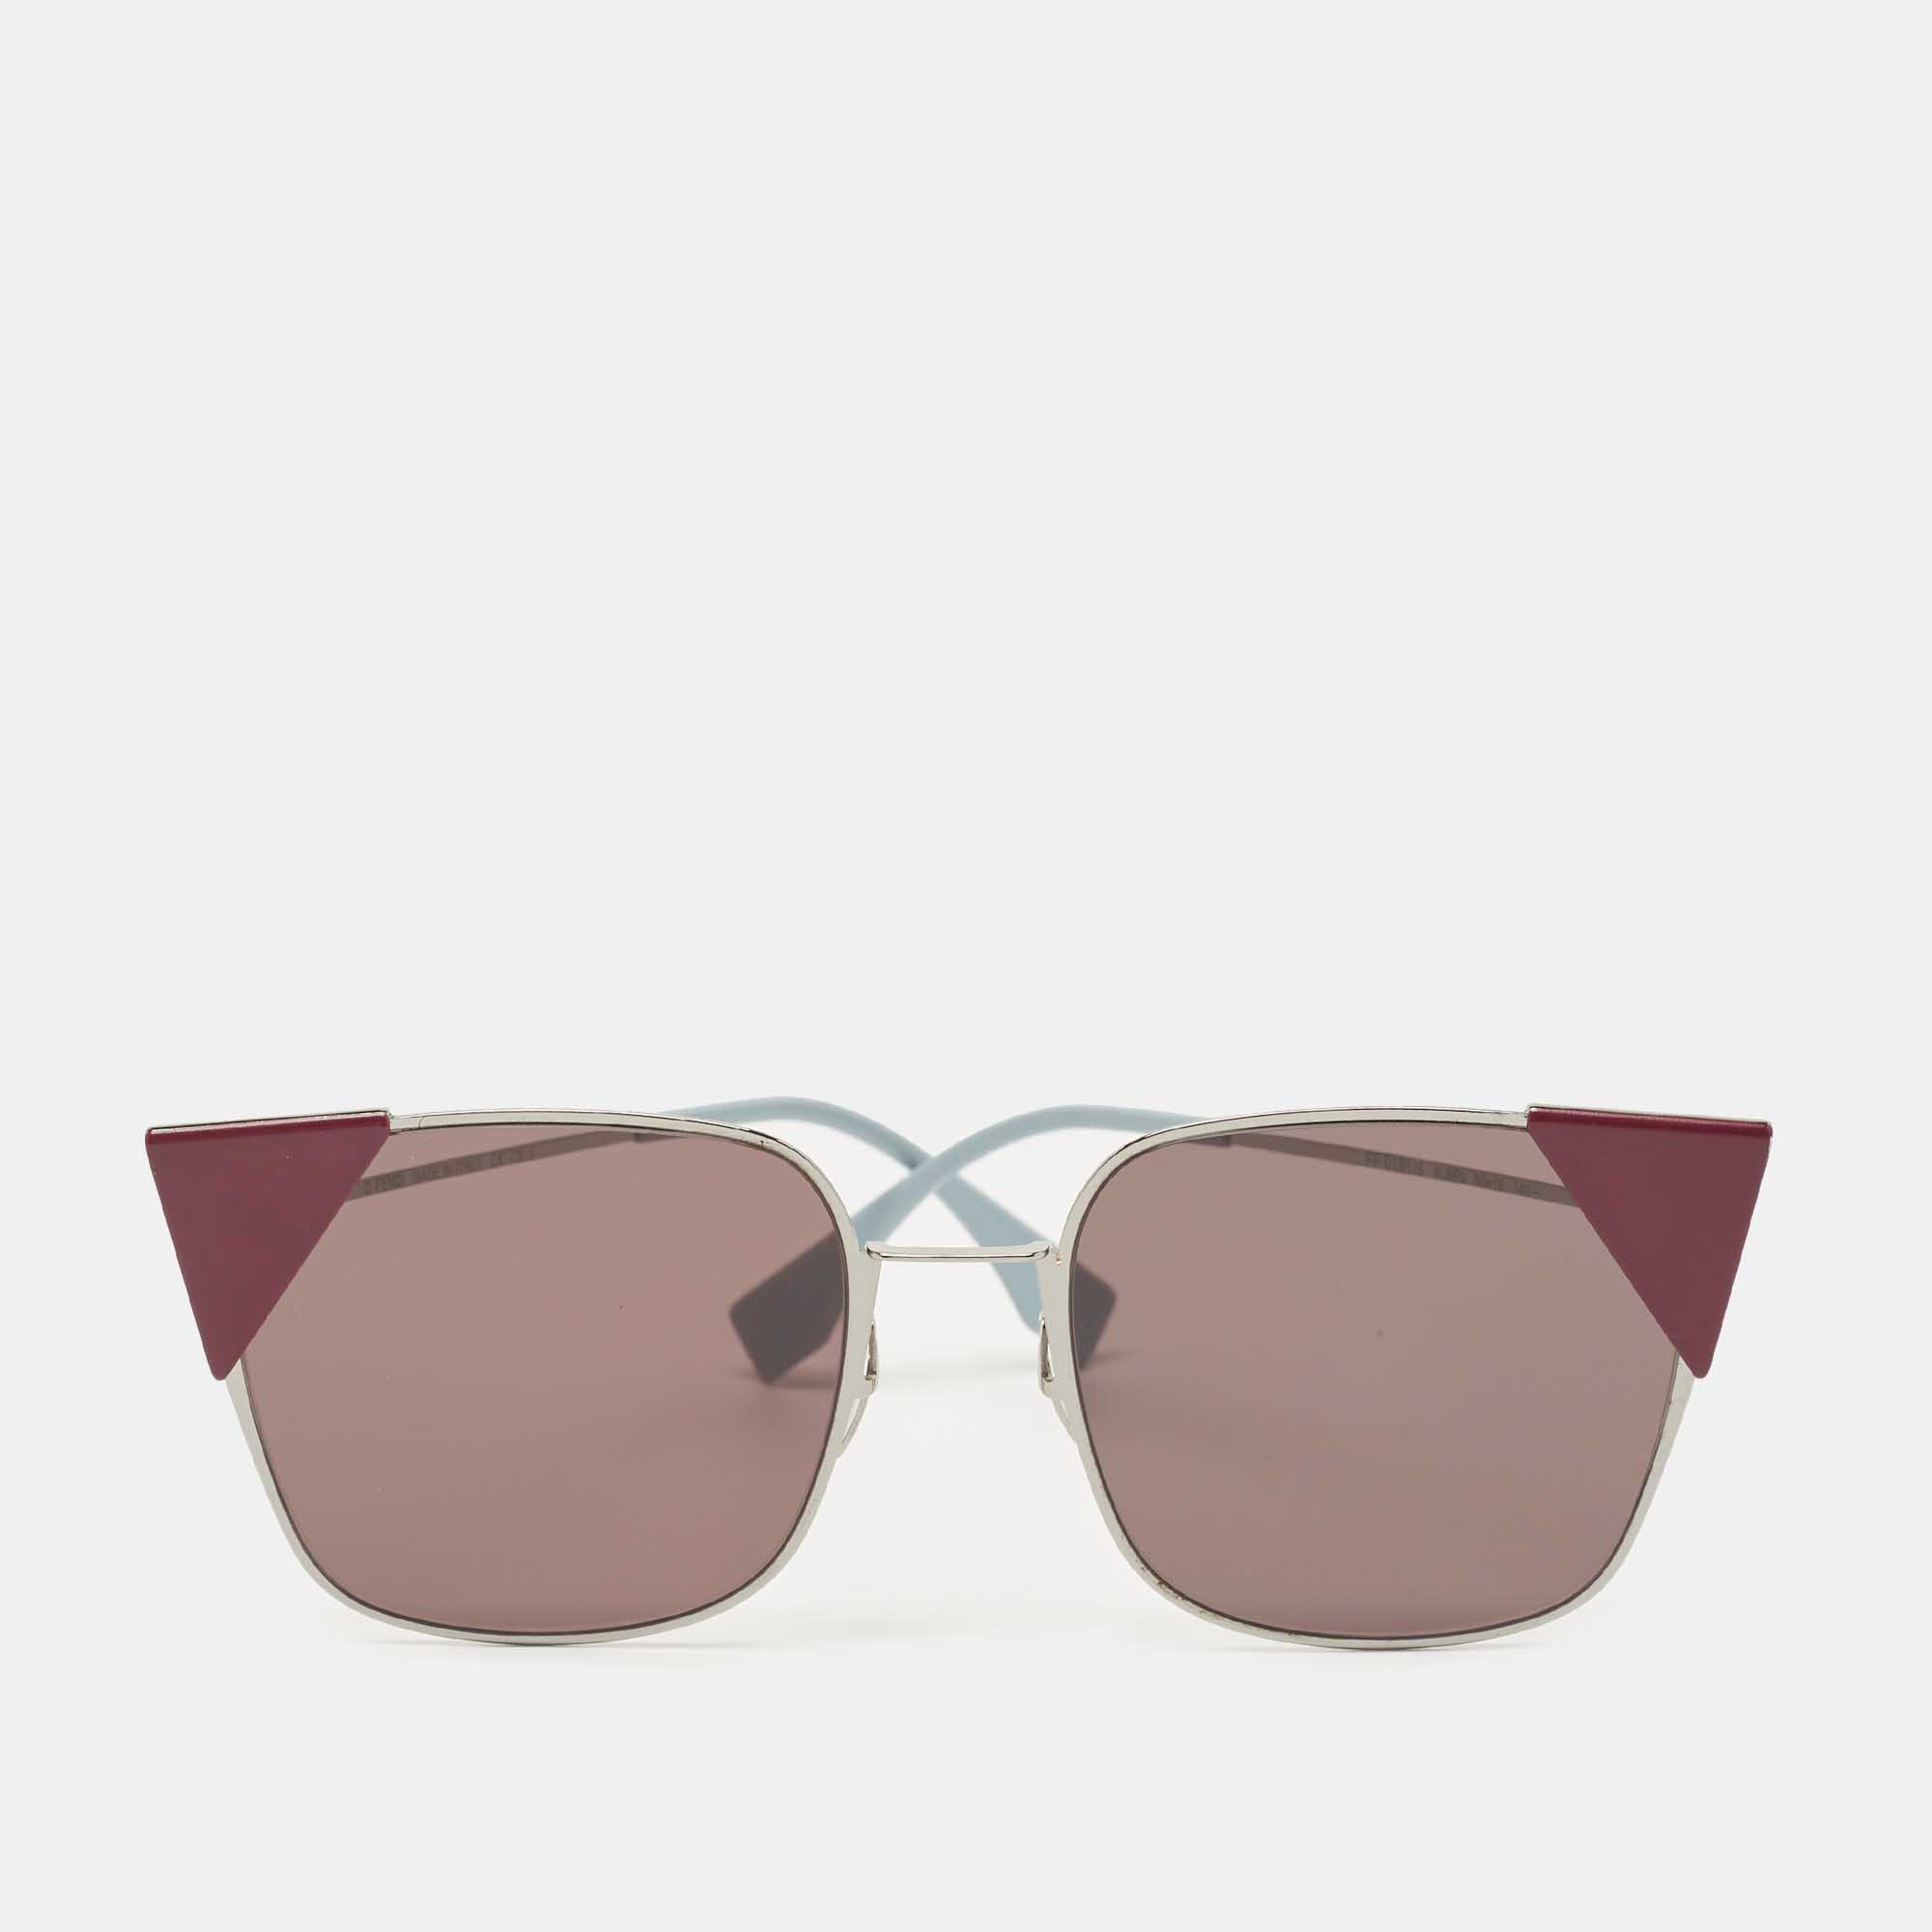 Elevate your eyewear game with these Fendi sunglasses. Meticulously crafted from premium materials they offer unparalleled protection and a timeless design making them a must have accessory for the fashion forward.